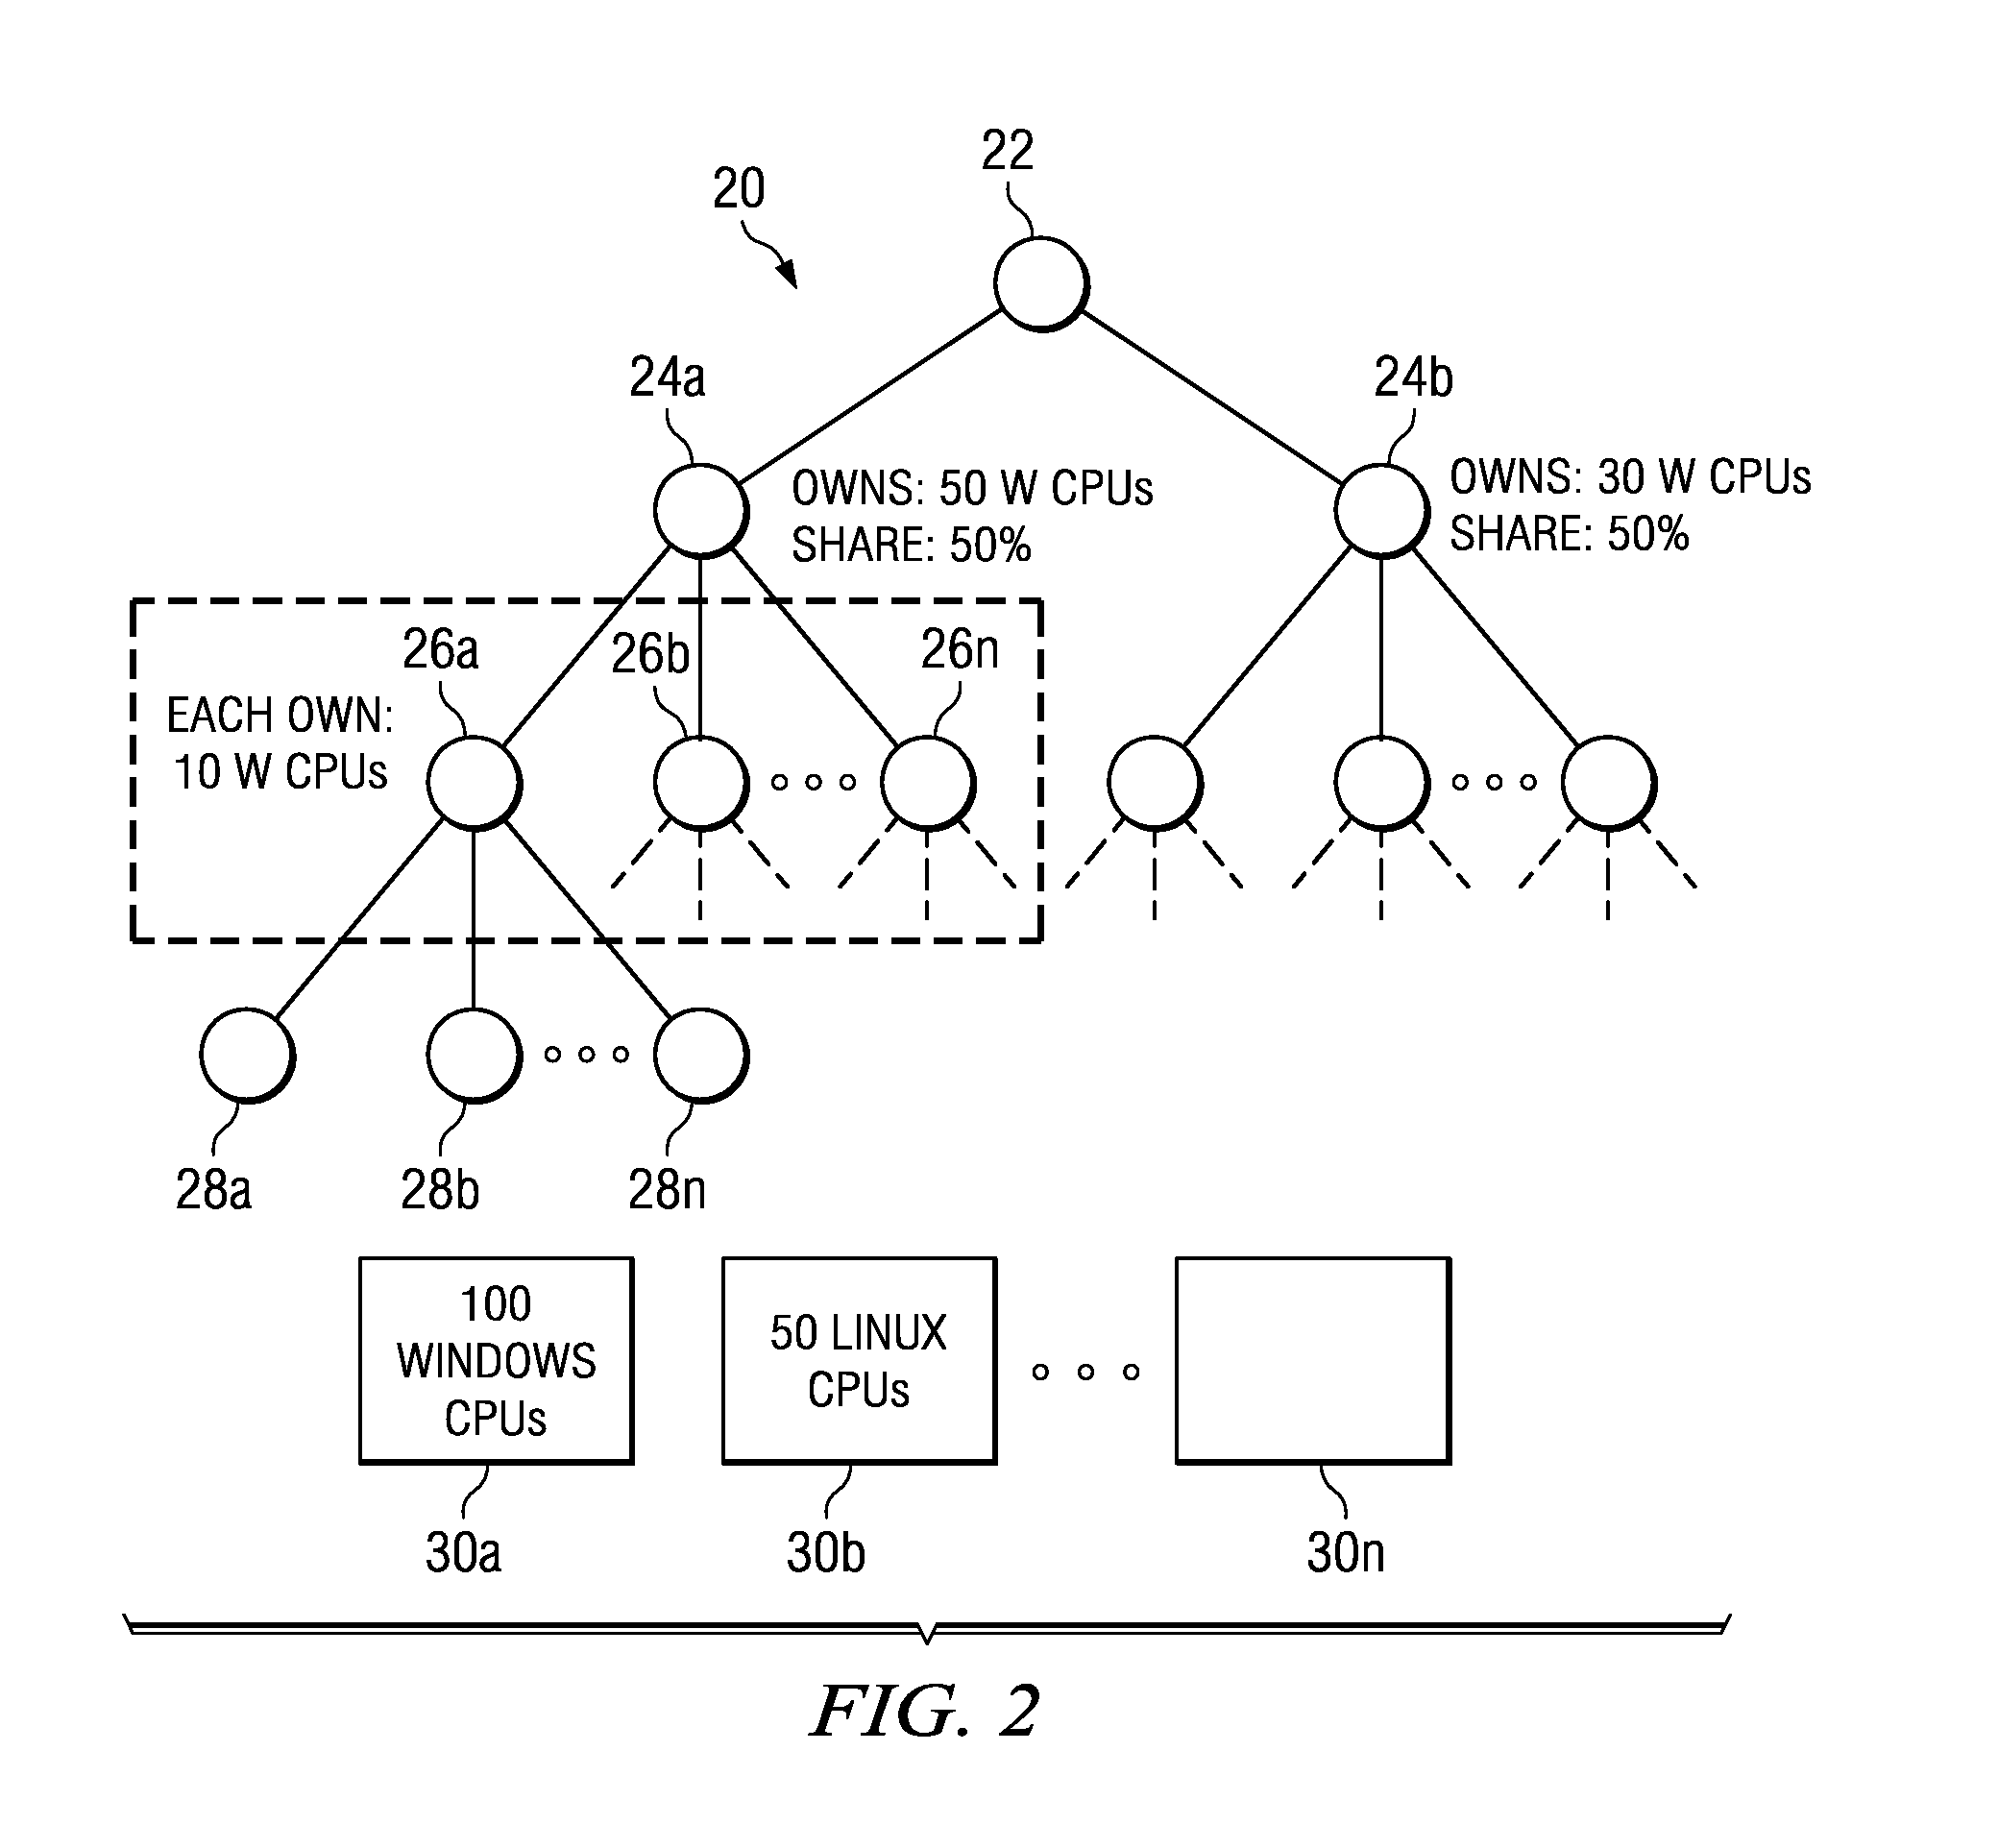 Resource manager for managing the sharing of resources among multiple workloads in a distributed computing environment